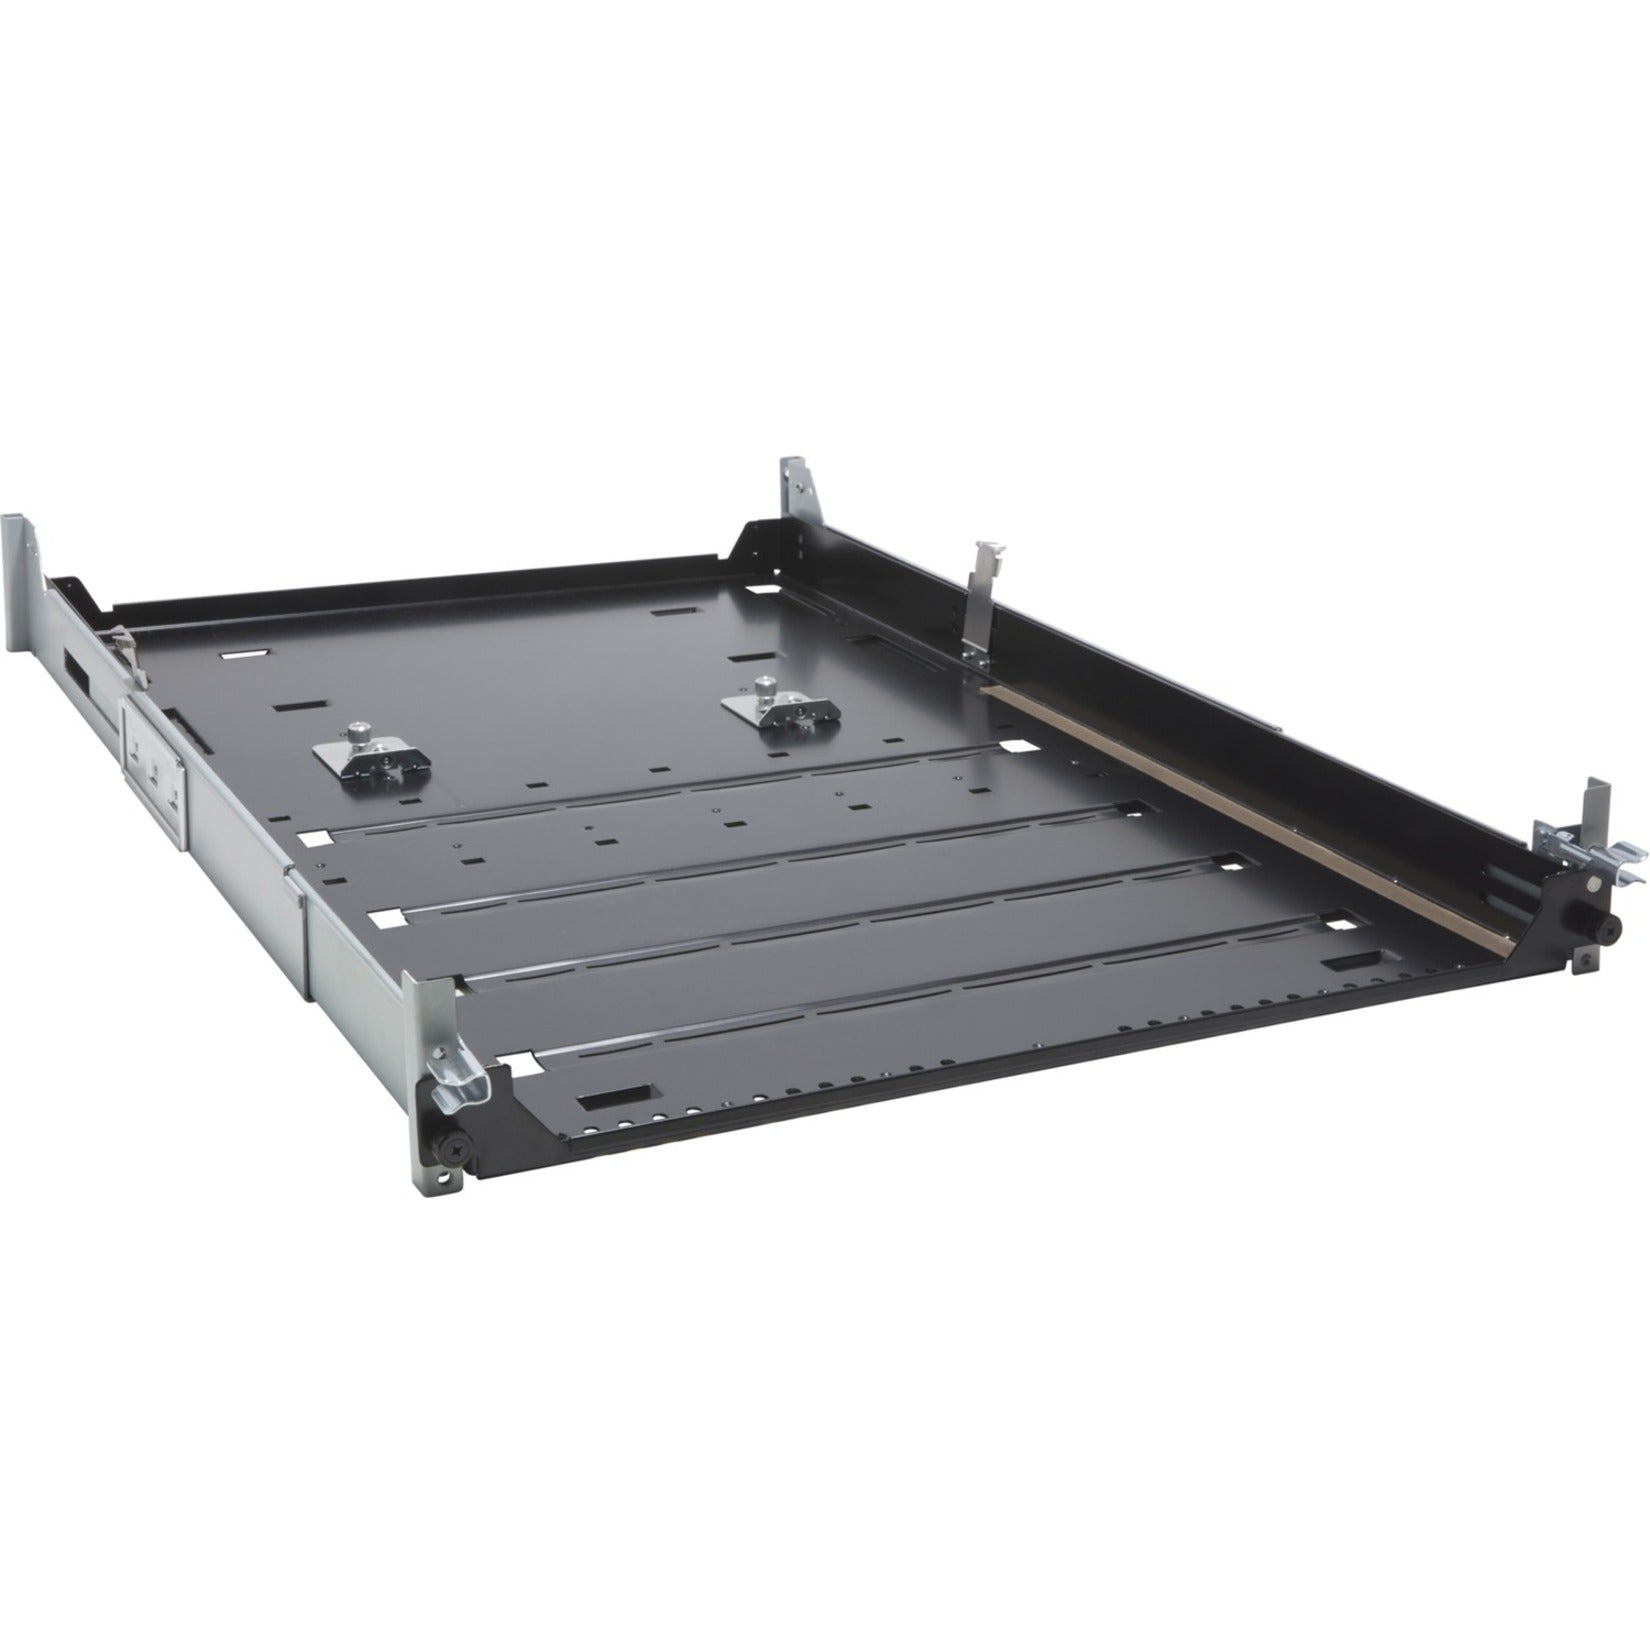 HP 2A8Y5AA Mounting Rail Kit, Adjustable Depth for Rack Rail